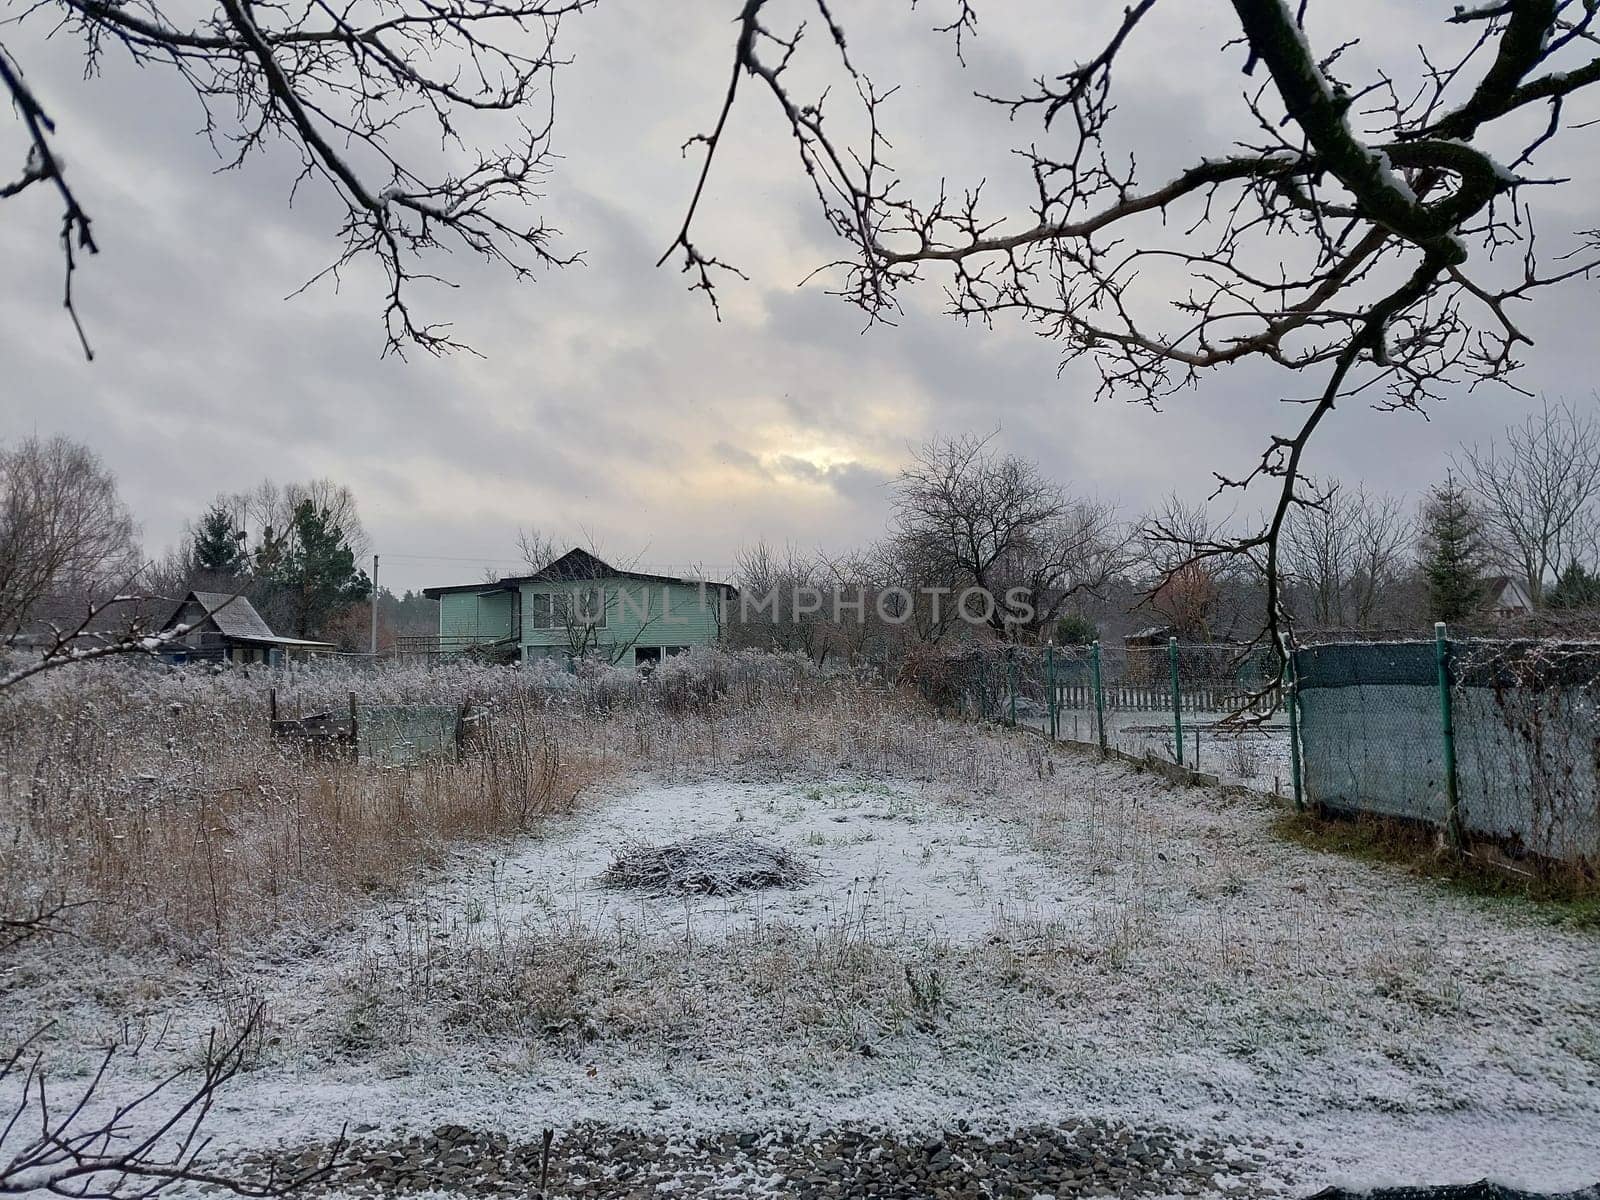 Snow fell on the garden where vegetables grow in the village by architectphd